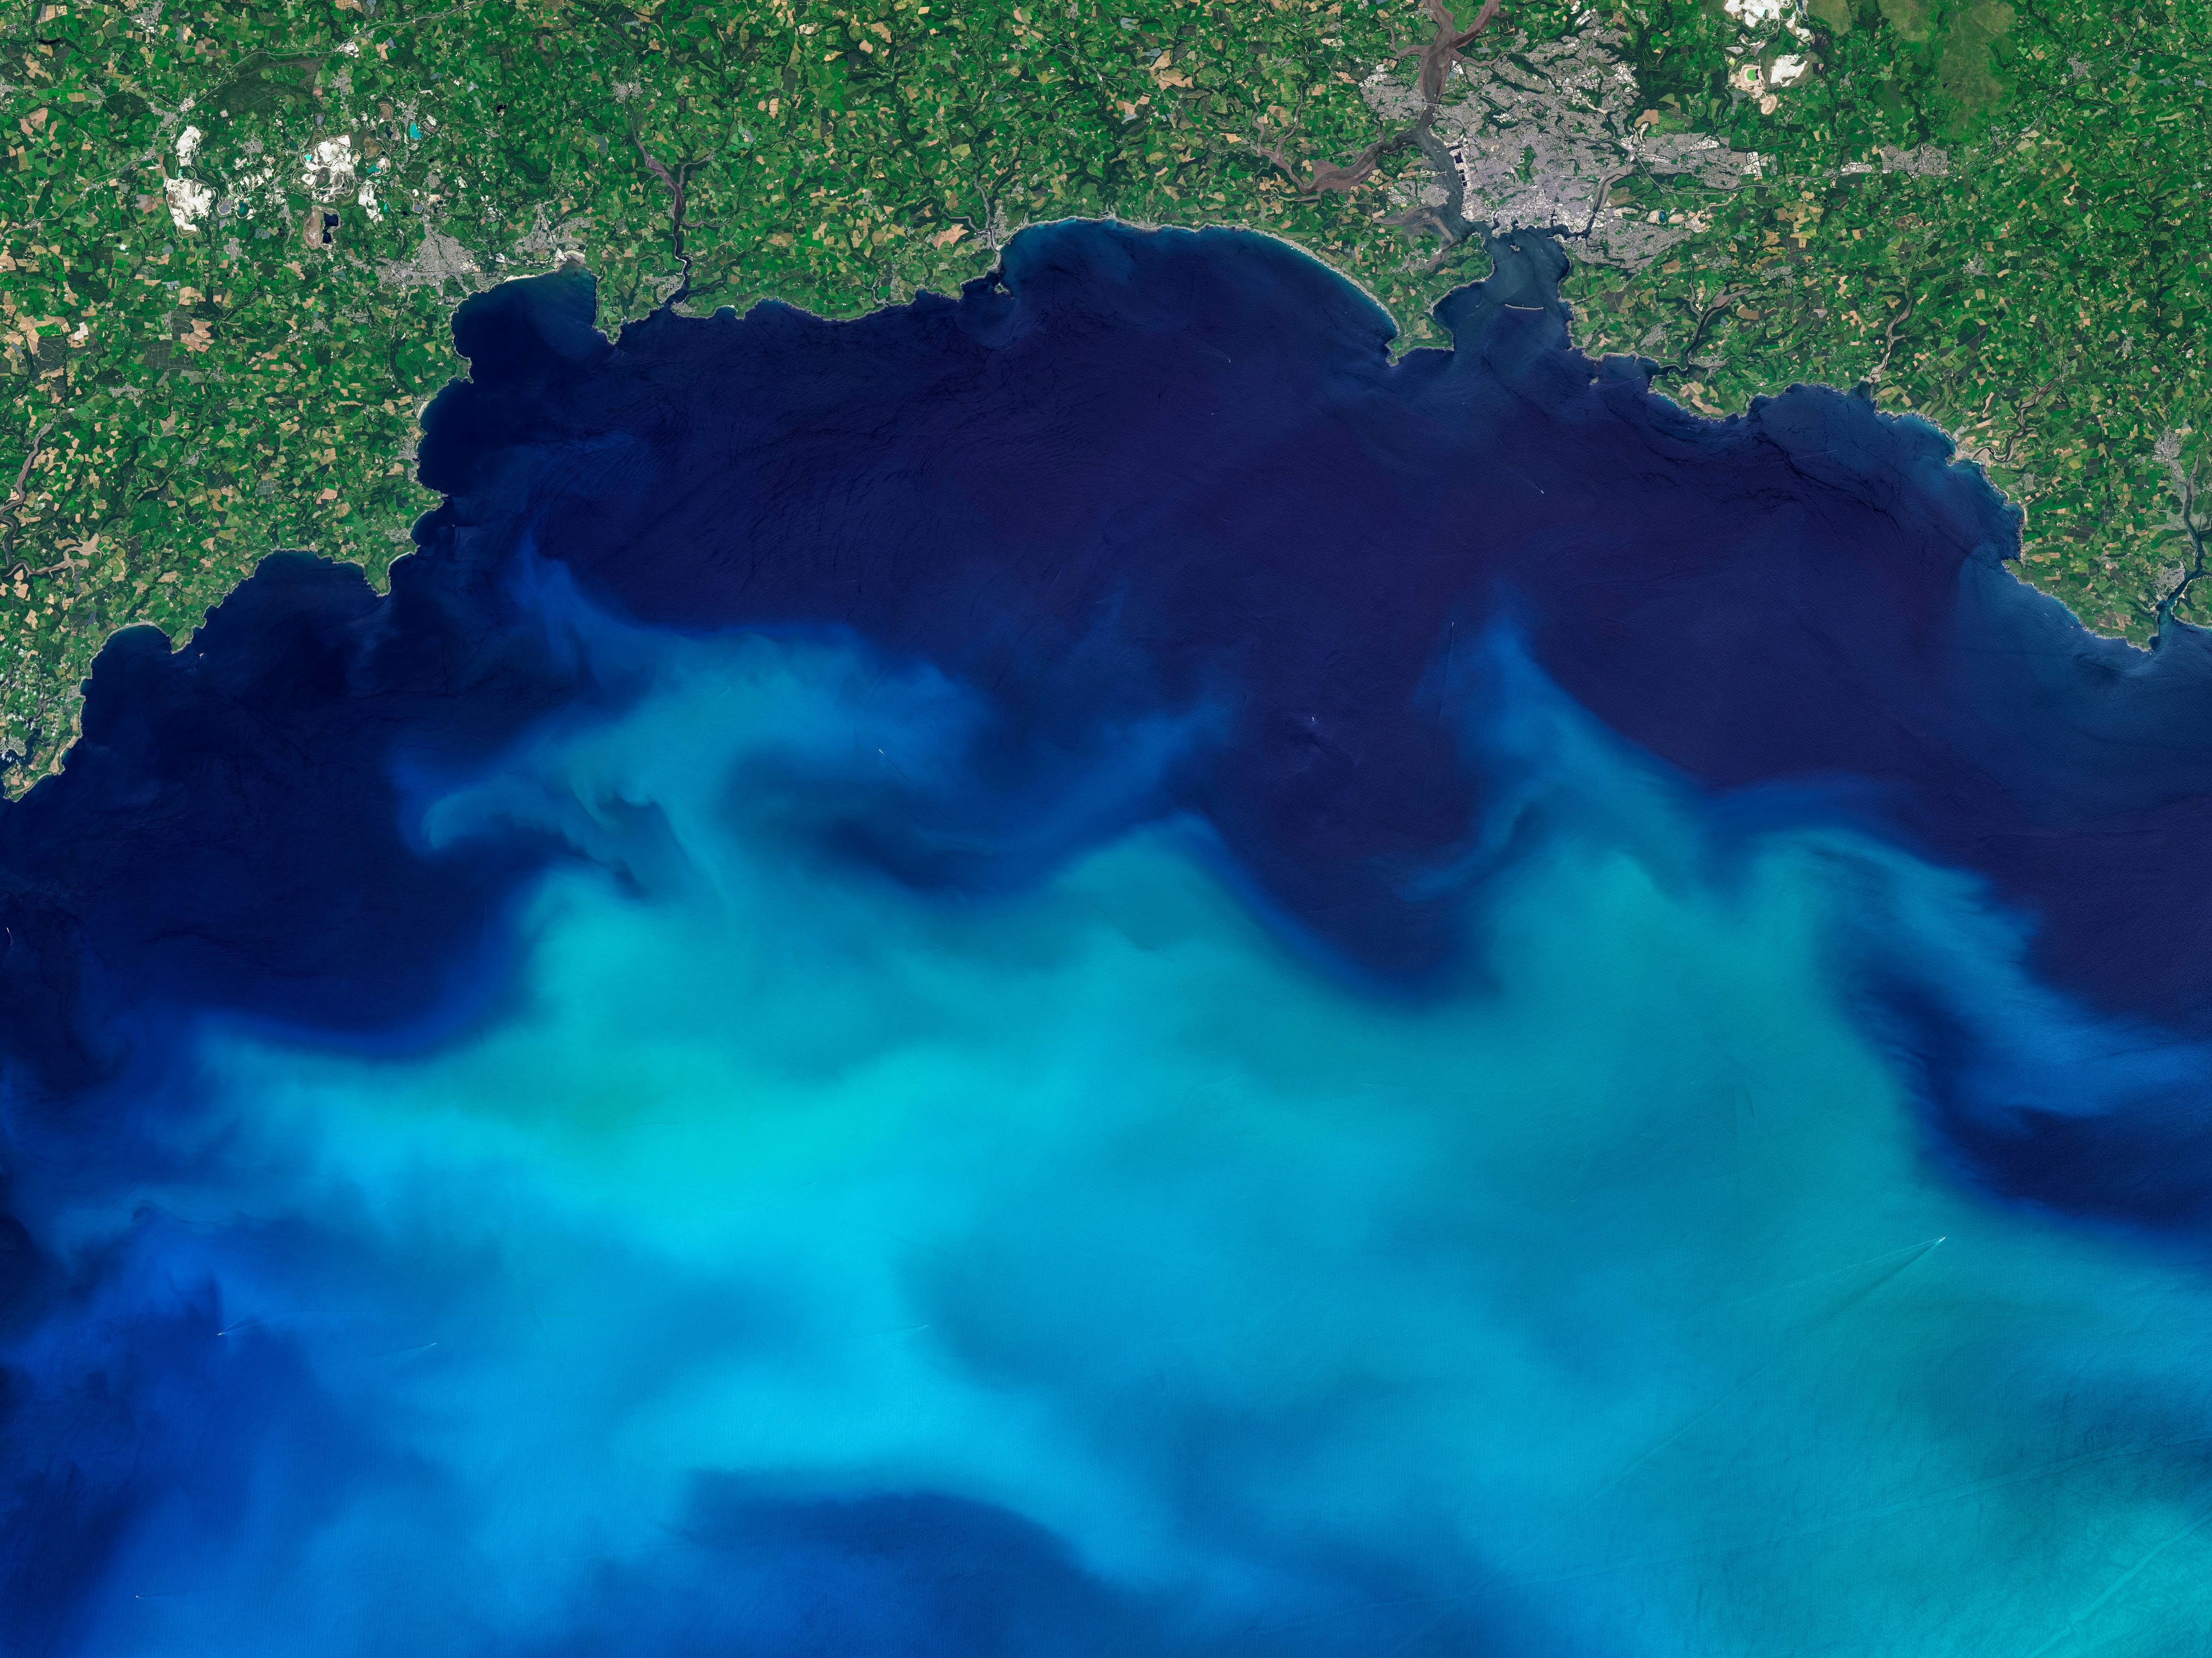 A phytoplankton bloom off the South Coast of Britain